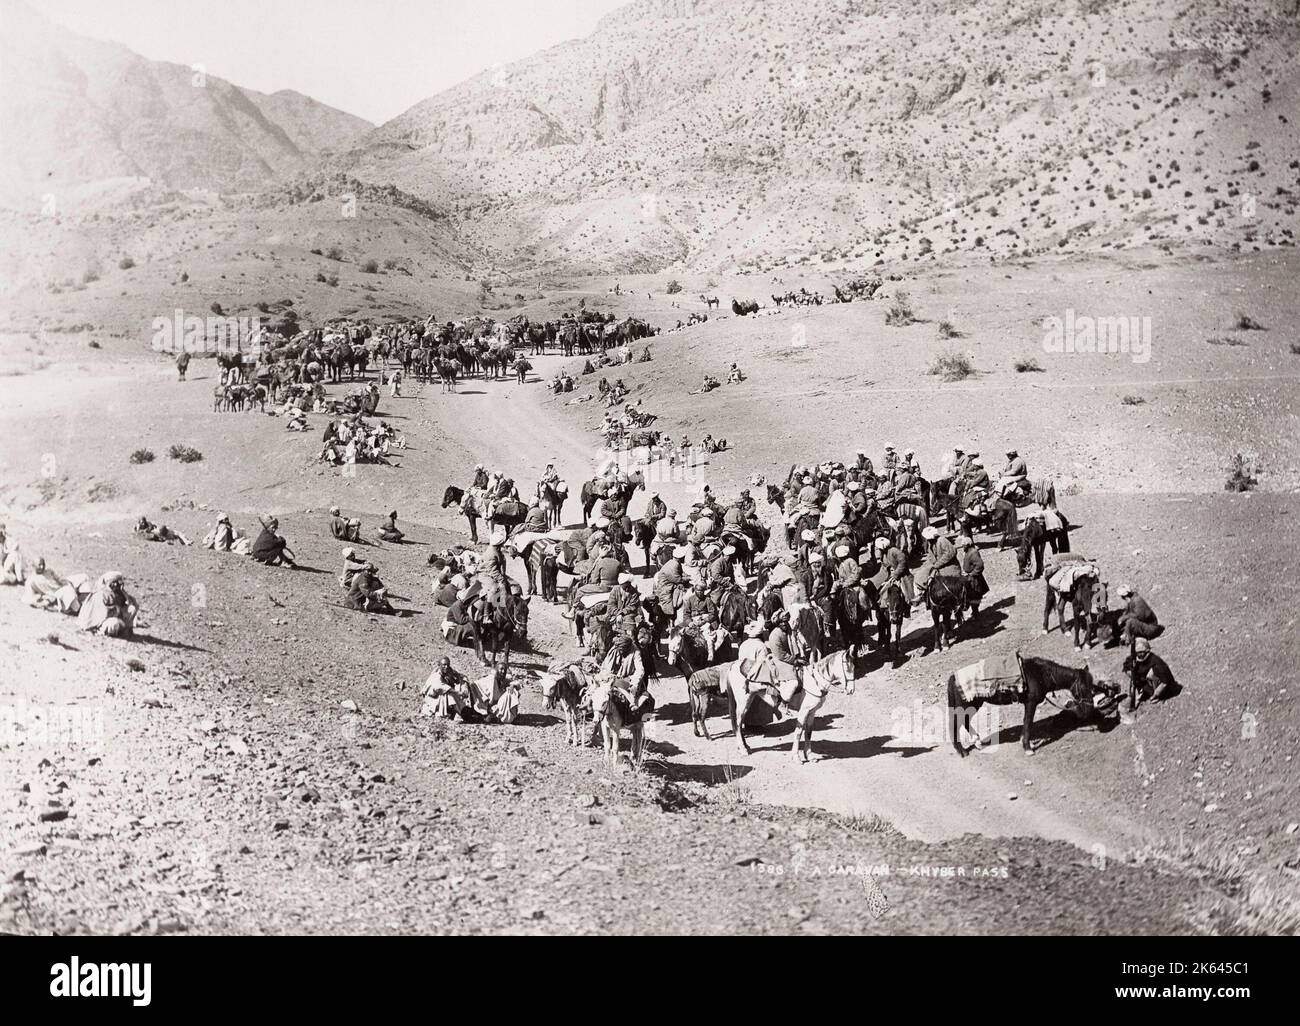 19th century vintage photograph: a caravan ogf horses and camels heading into the Khyber Pass, North West Frontier, British India, now Pakistan. Stock Photo